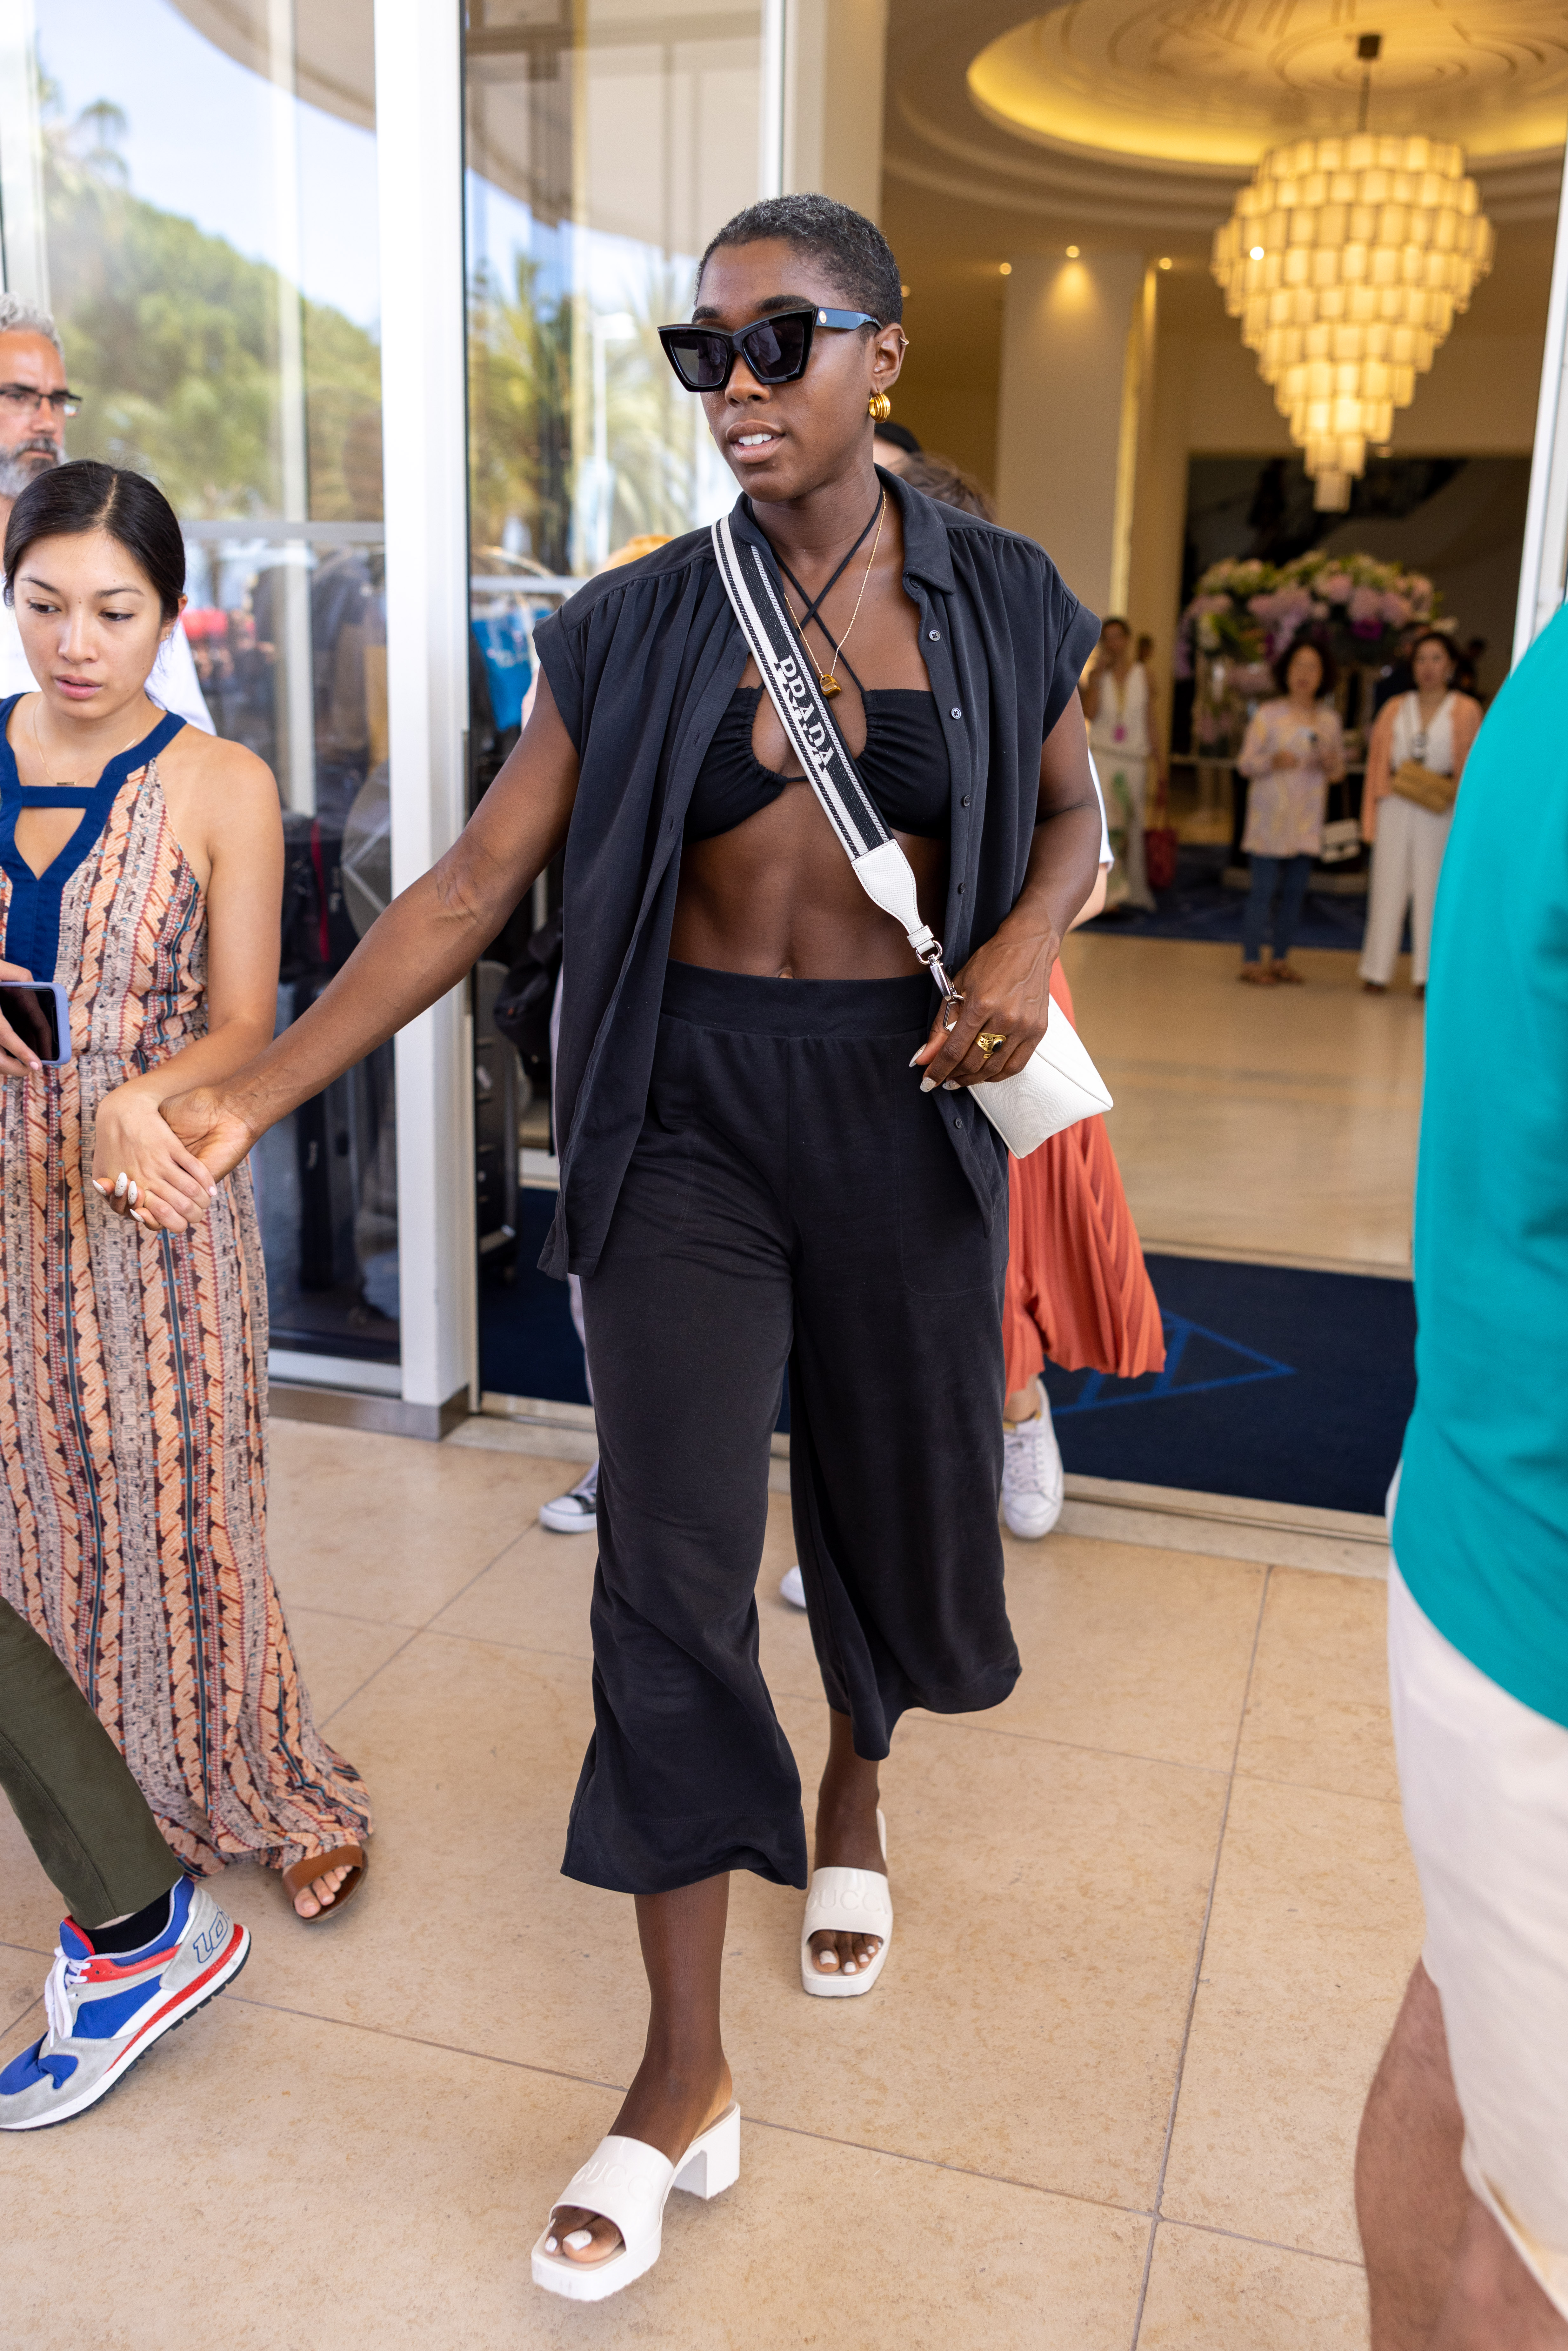 Best Off-Duty Street Style Looks from the 2022 Cannes Film Festival